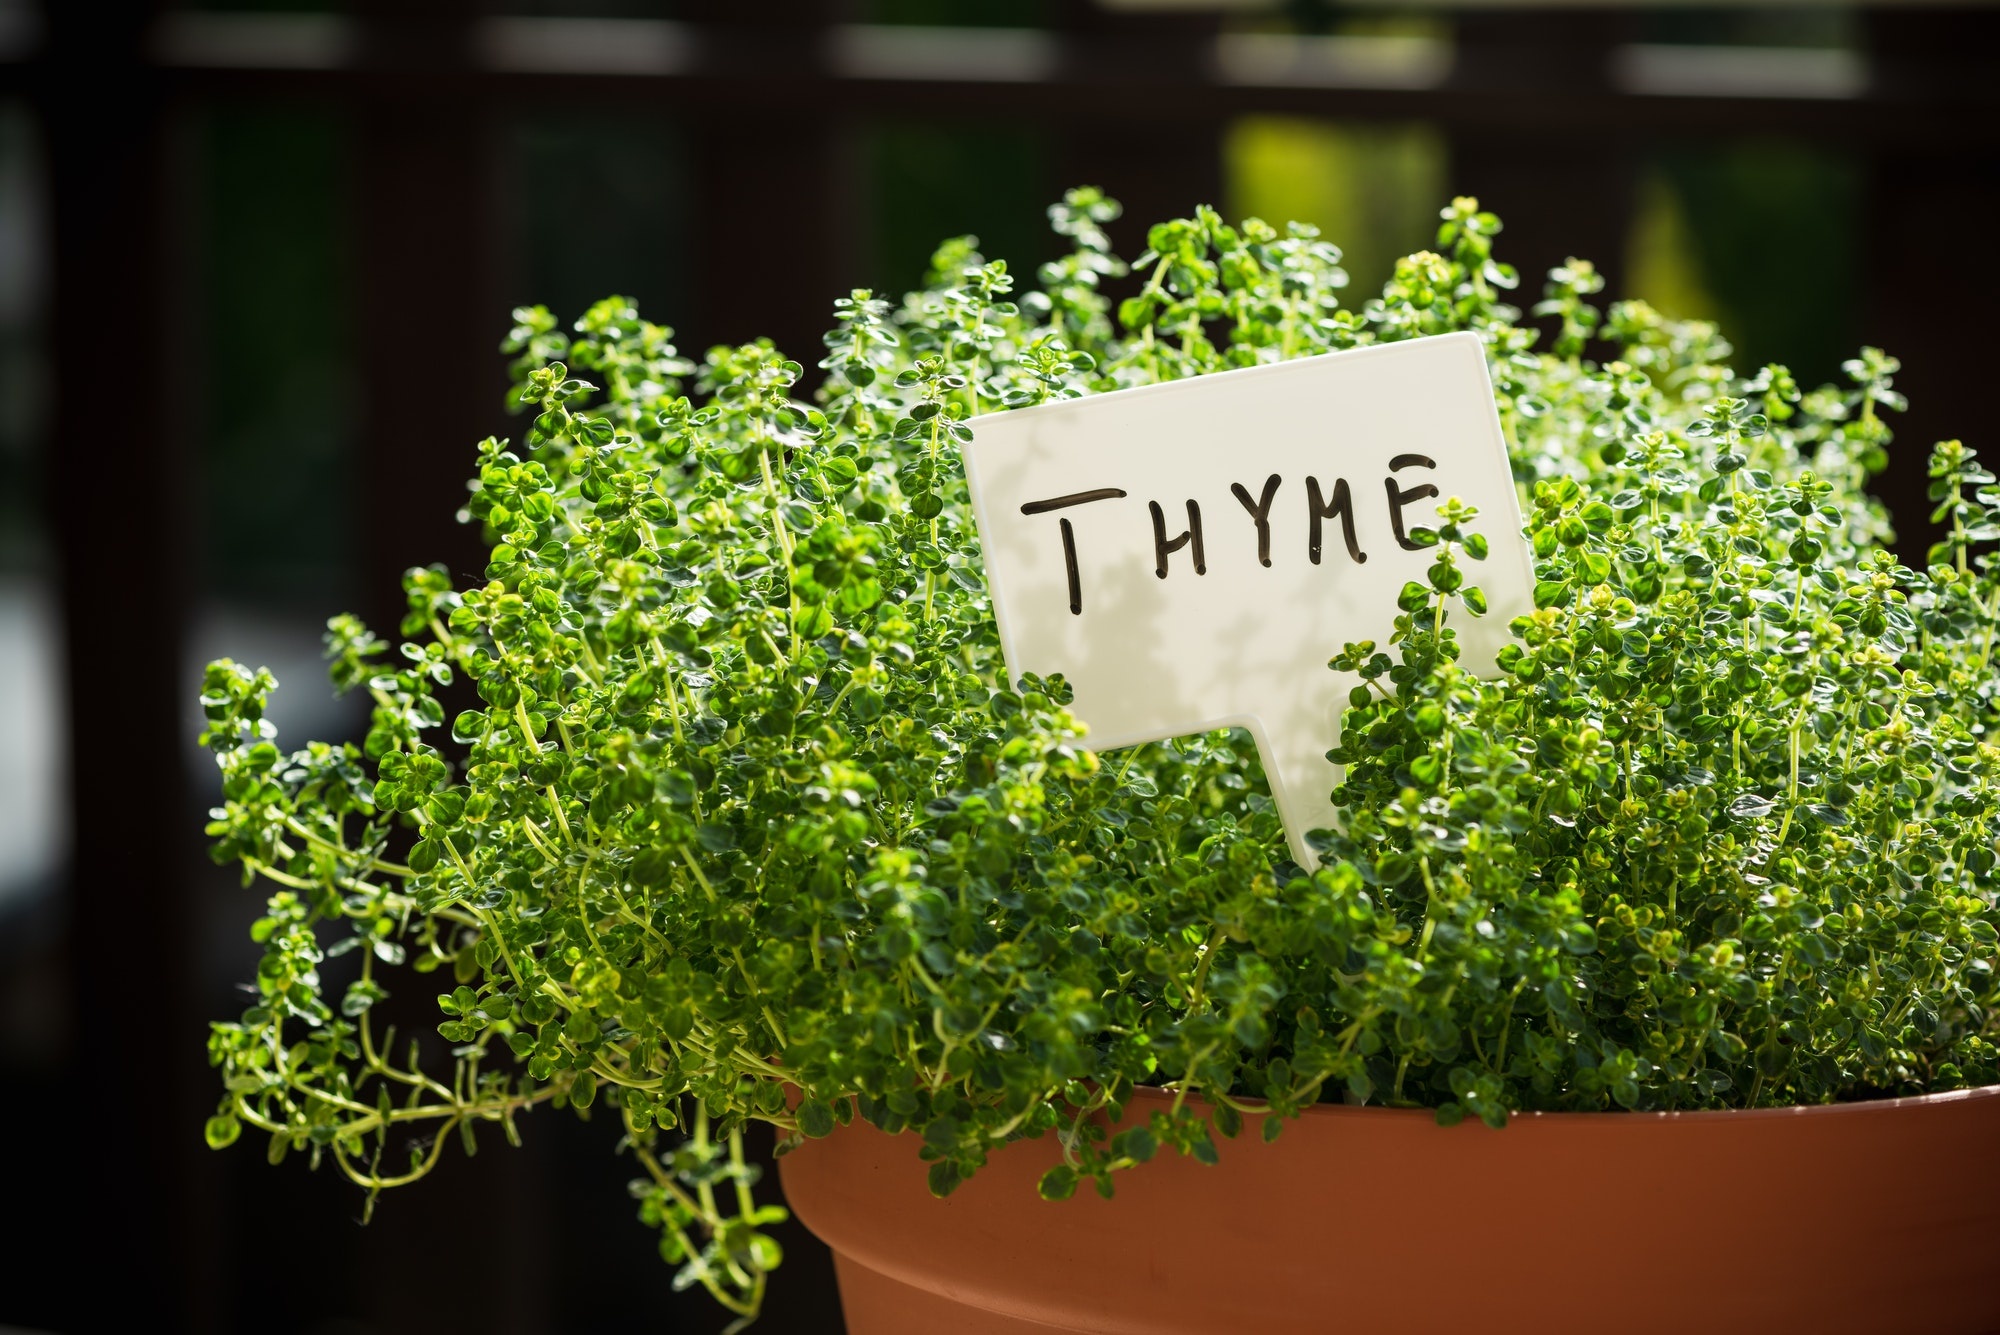 Thyme companion plants, Planting advice, Gardening tips, Thehometome suggestions, 2000x1340 HD Desktop